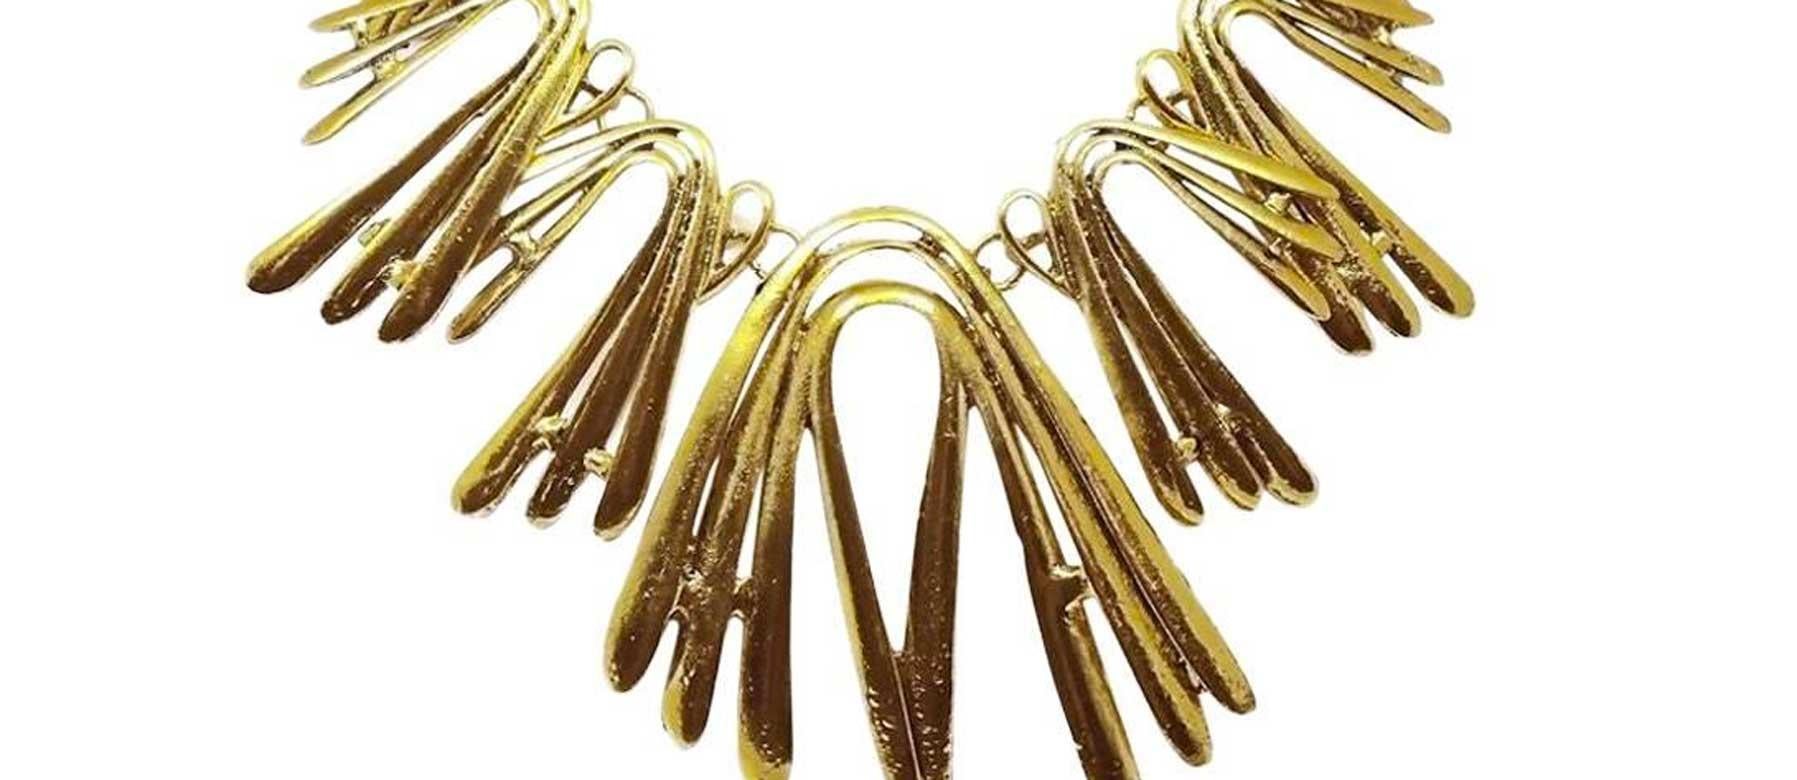 This very much in demand Oscar De La Renta necklace is bent and shaped to look like gentle spikes. It is made in a gold tone setting and has a lobster clasp and measures 19” x 1/4”. The drop from top to bottom measures 4” x 3”. It is signed “Oscar